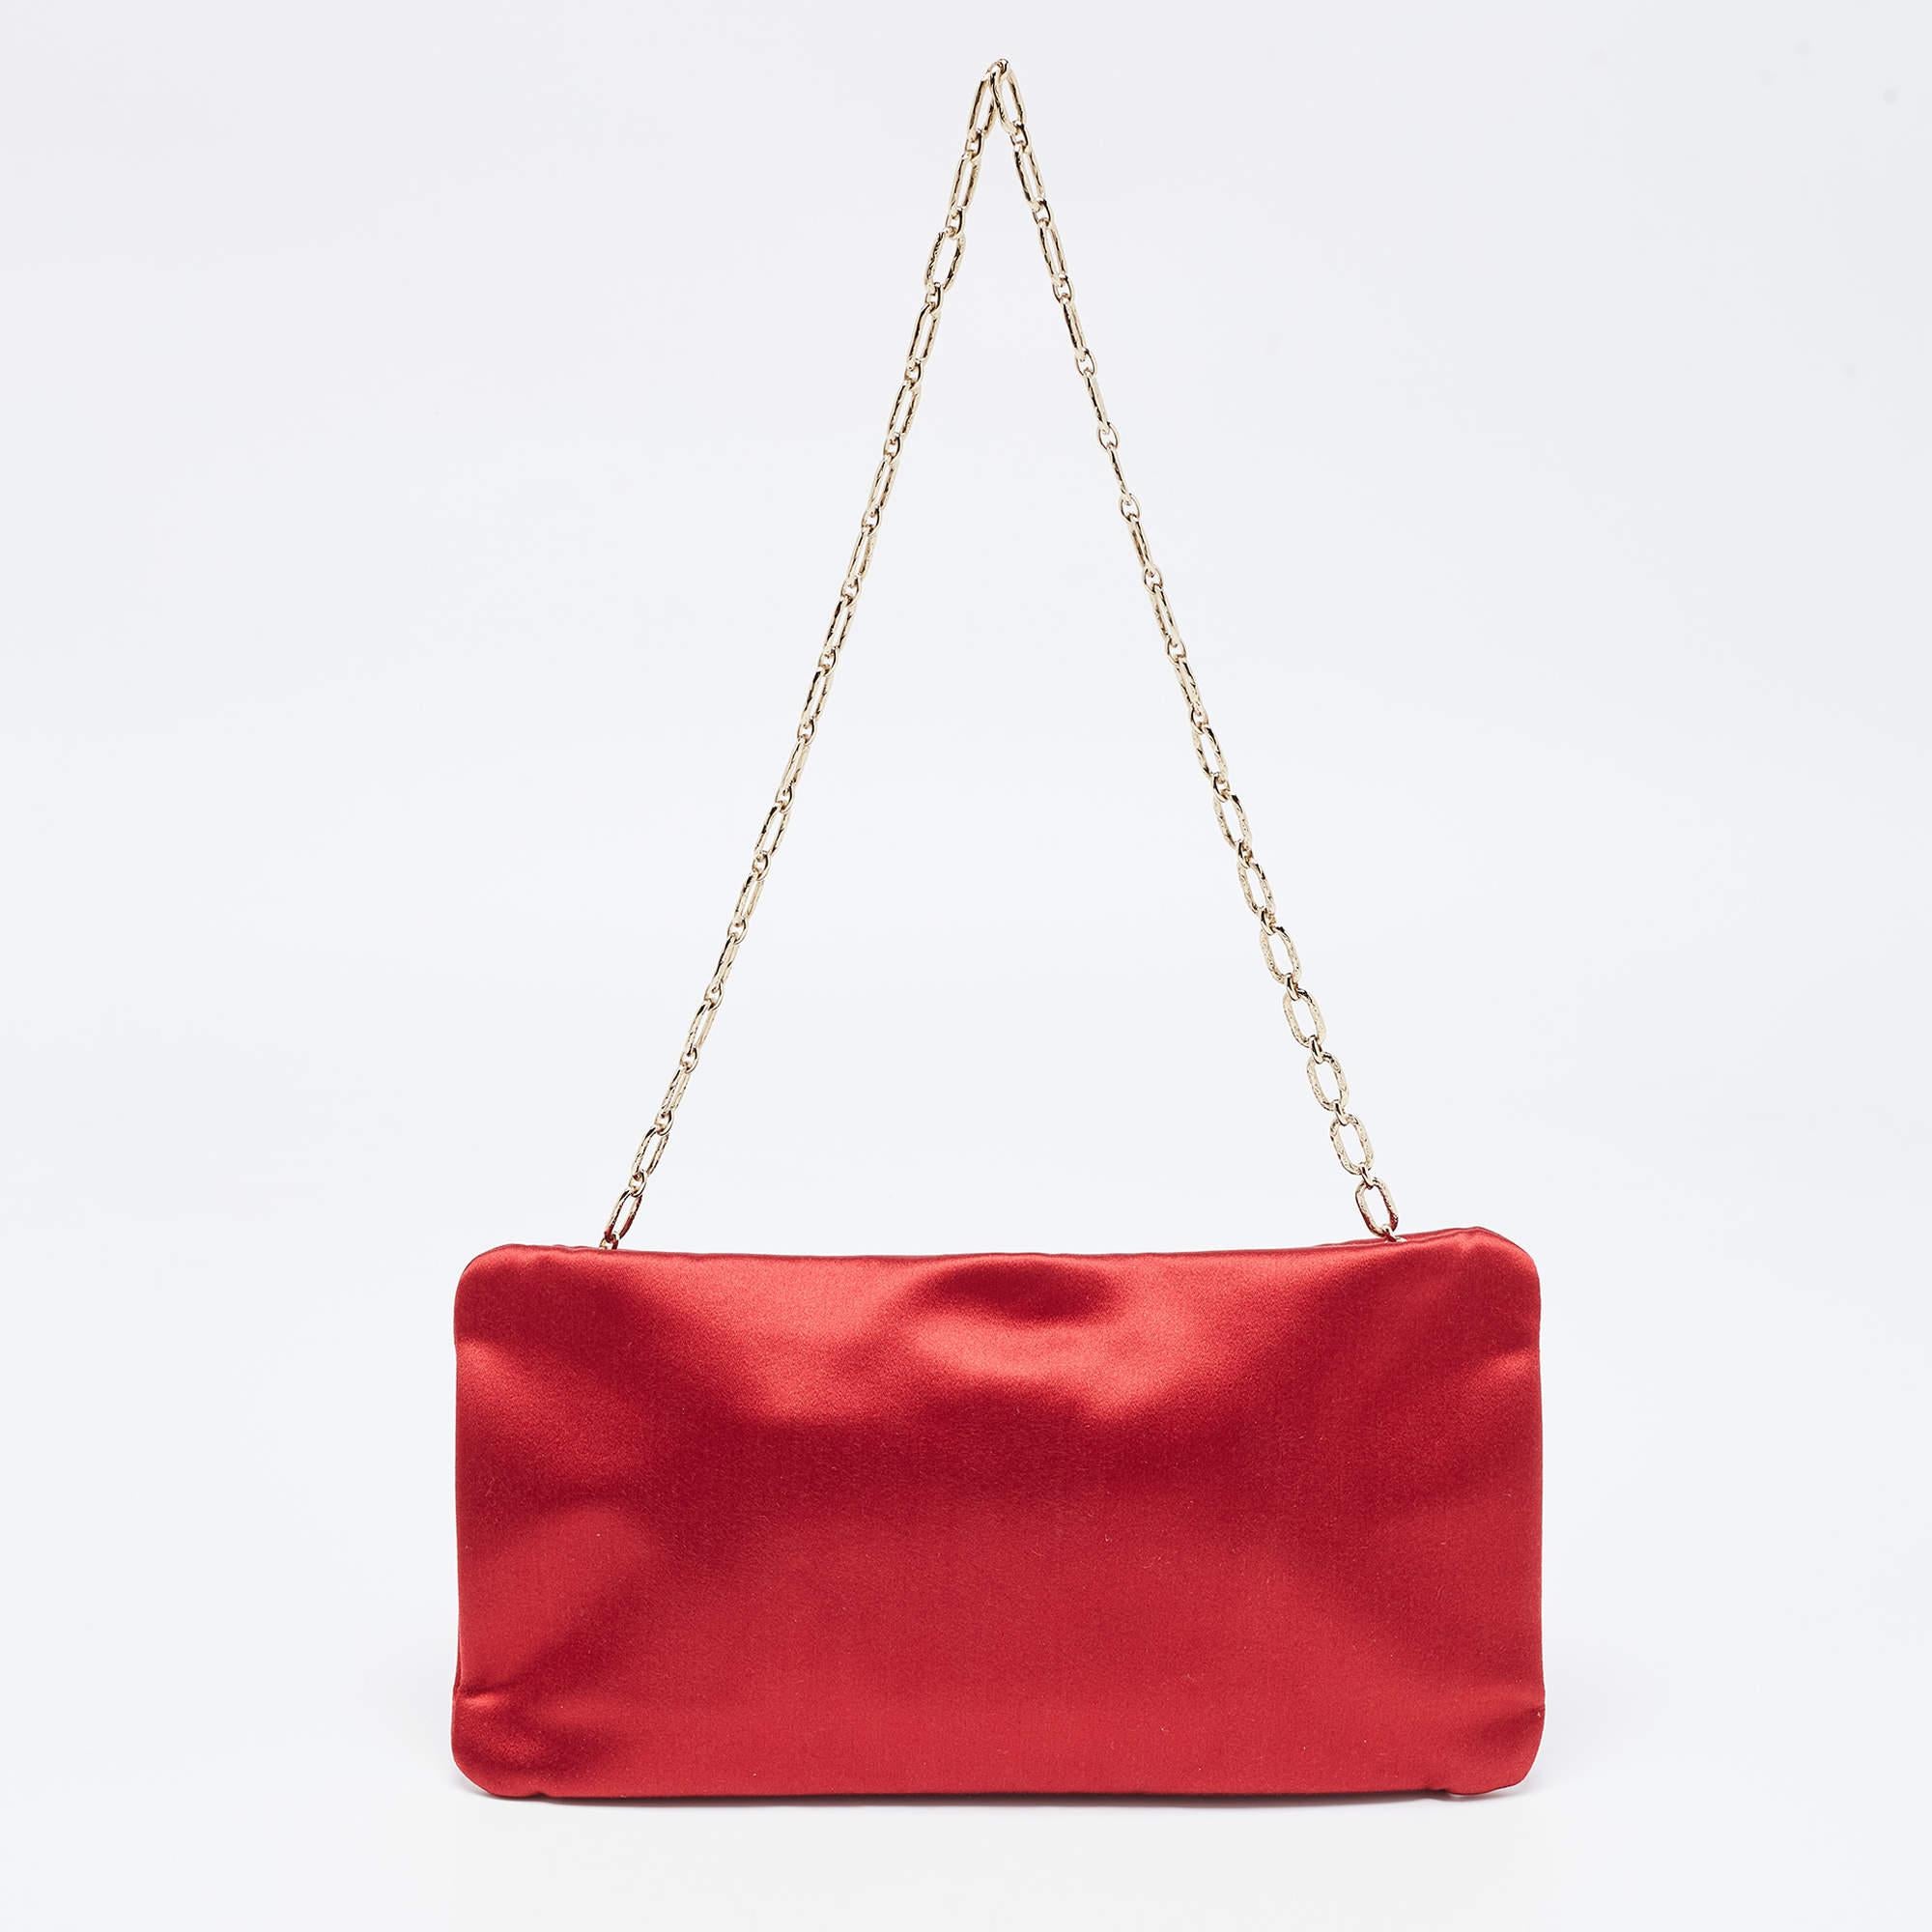 Chanel Red Satin Embellished Strass Camellia Chain Clutch 4